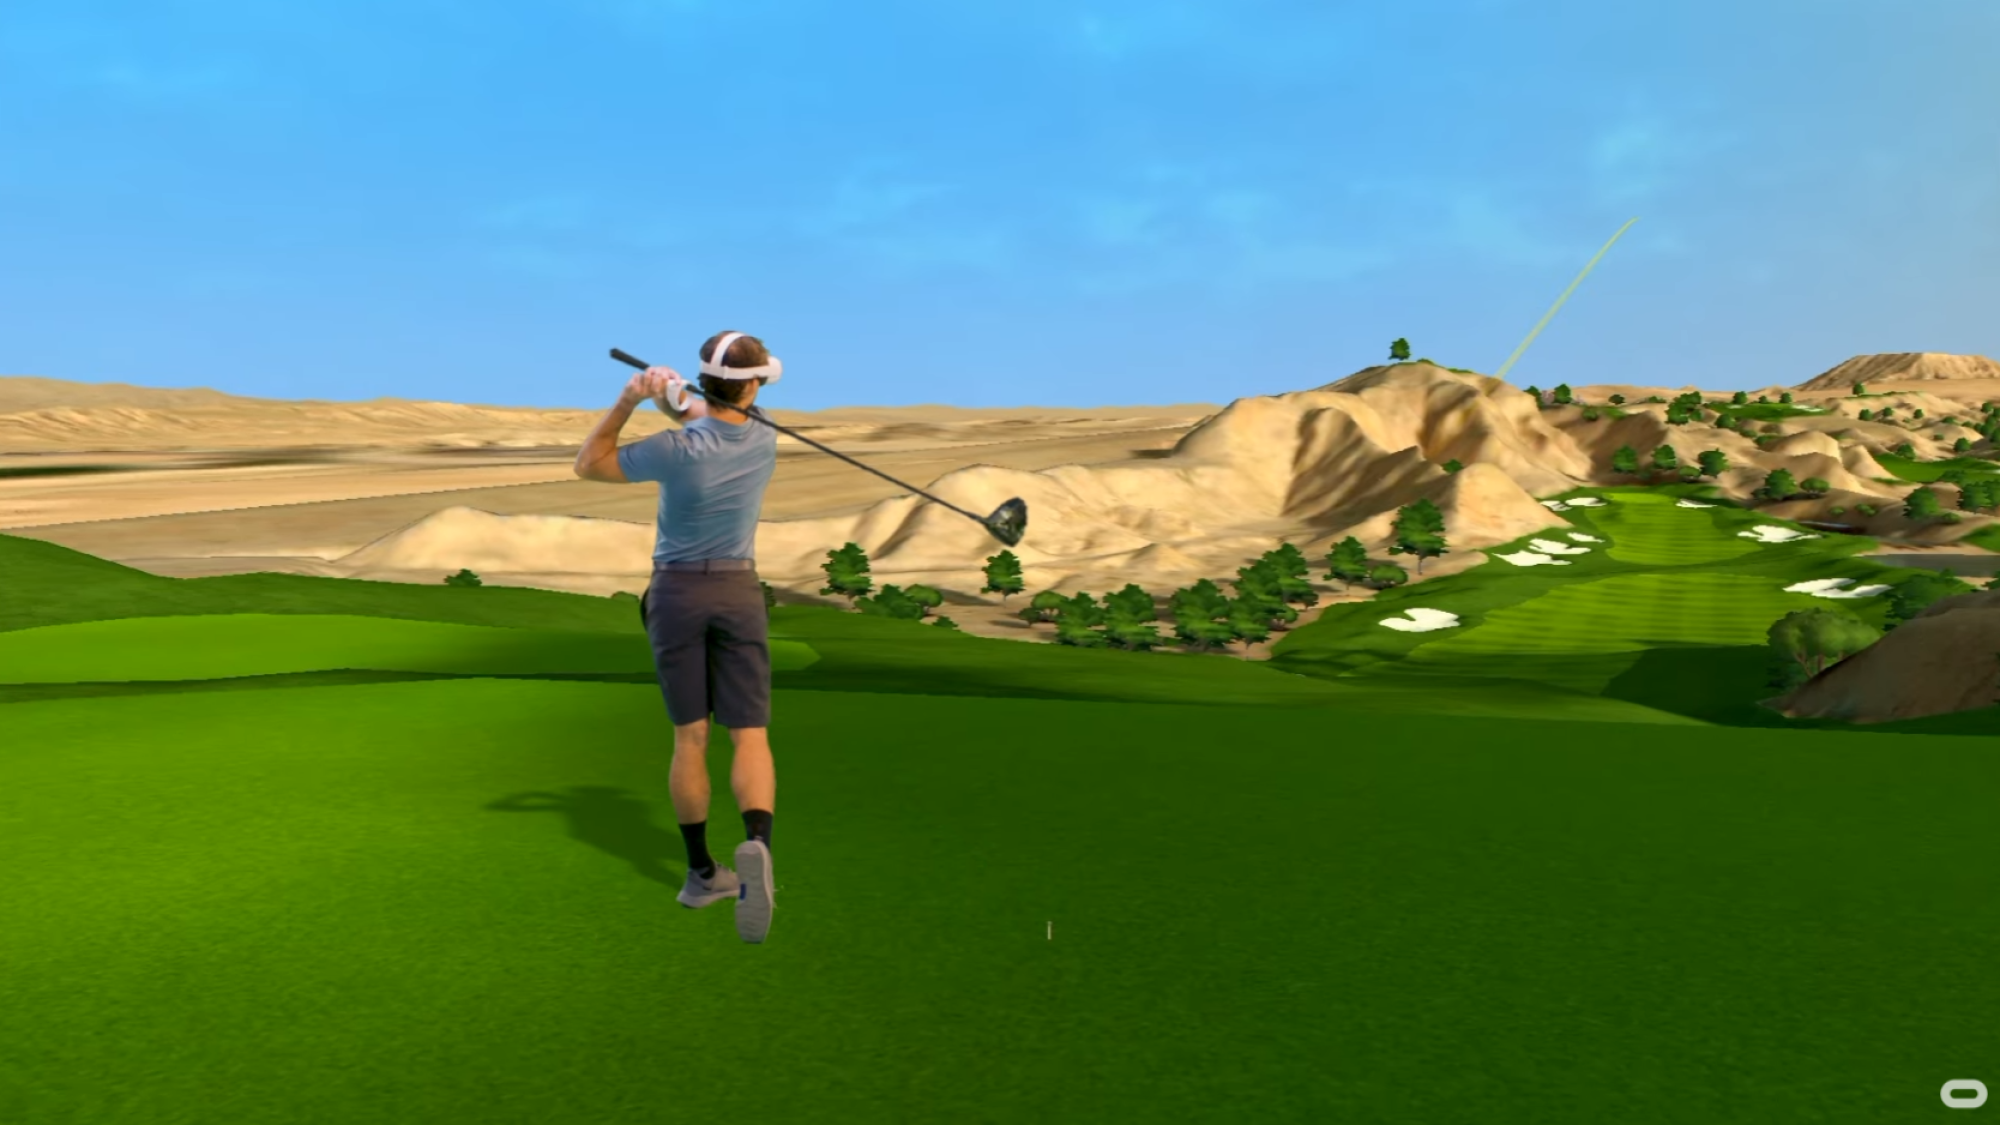 Screengrab from the Golf+ trailer via YouTube of the Man Swinging Club in VR.